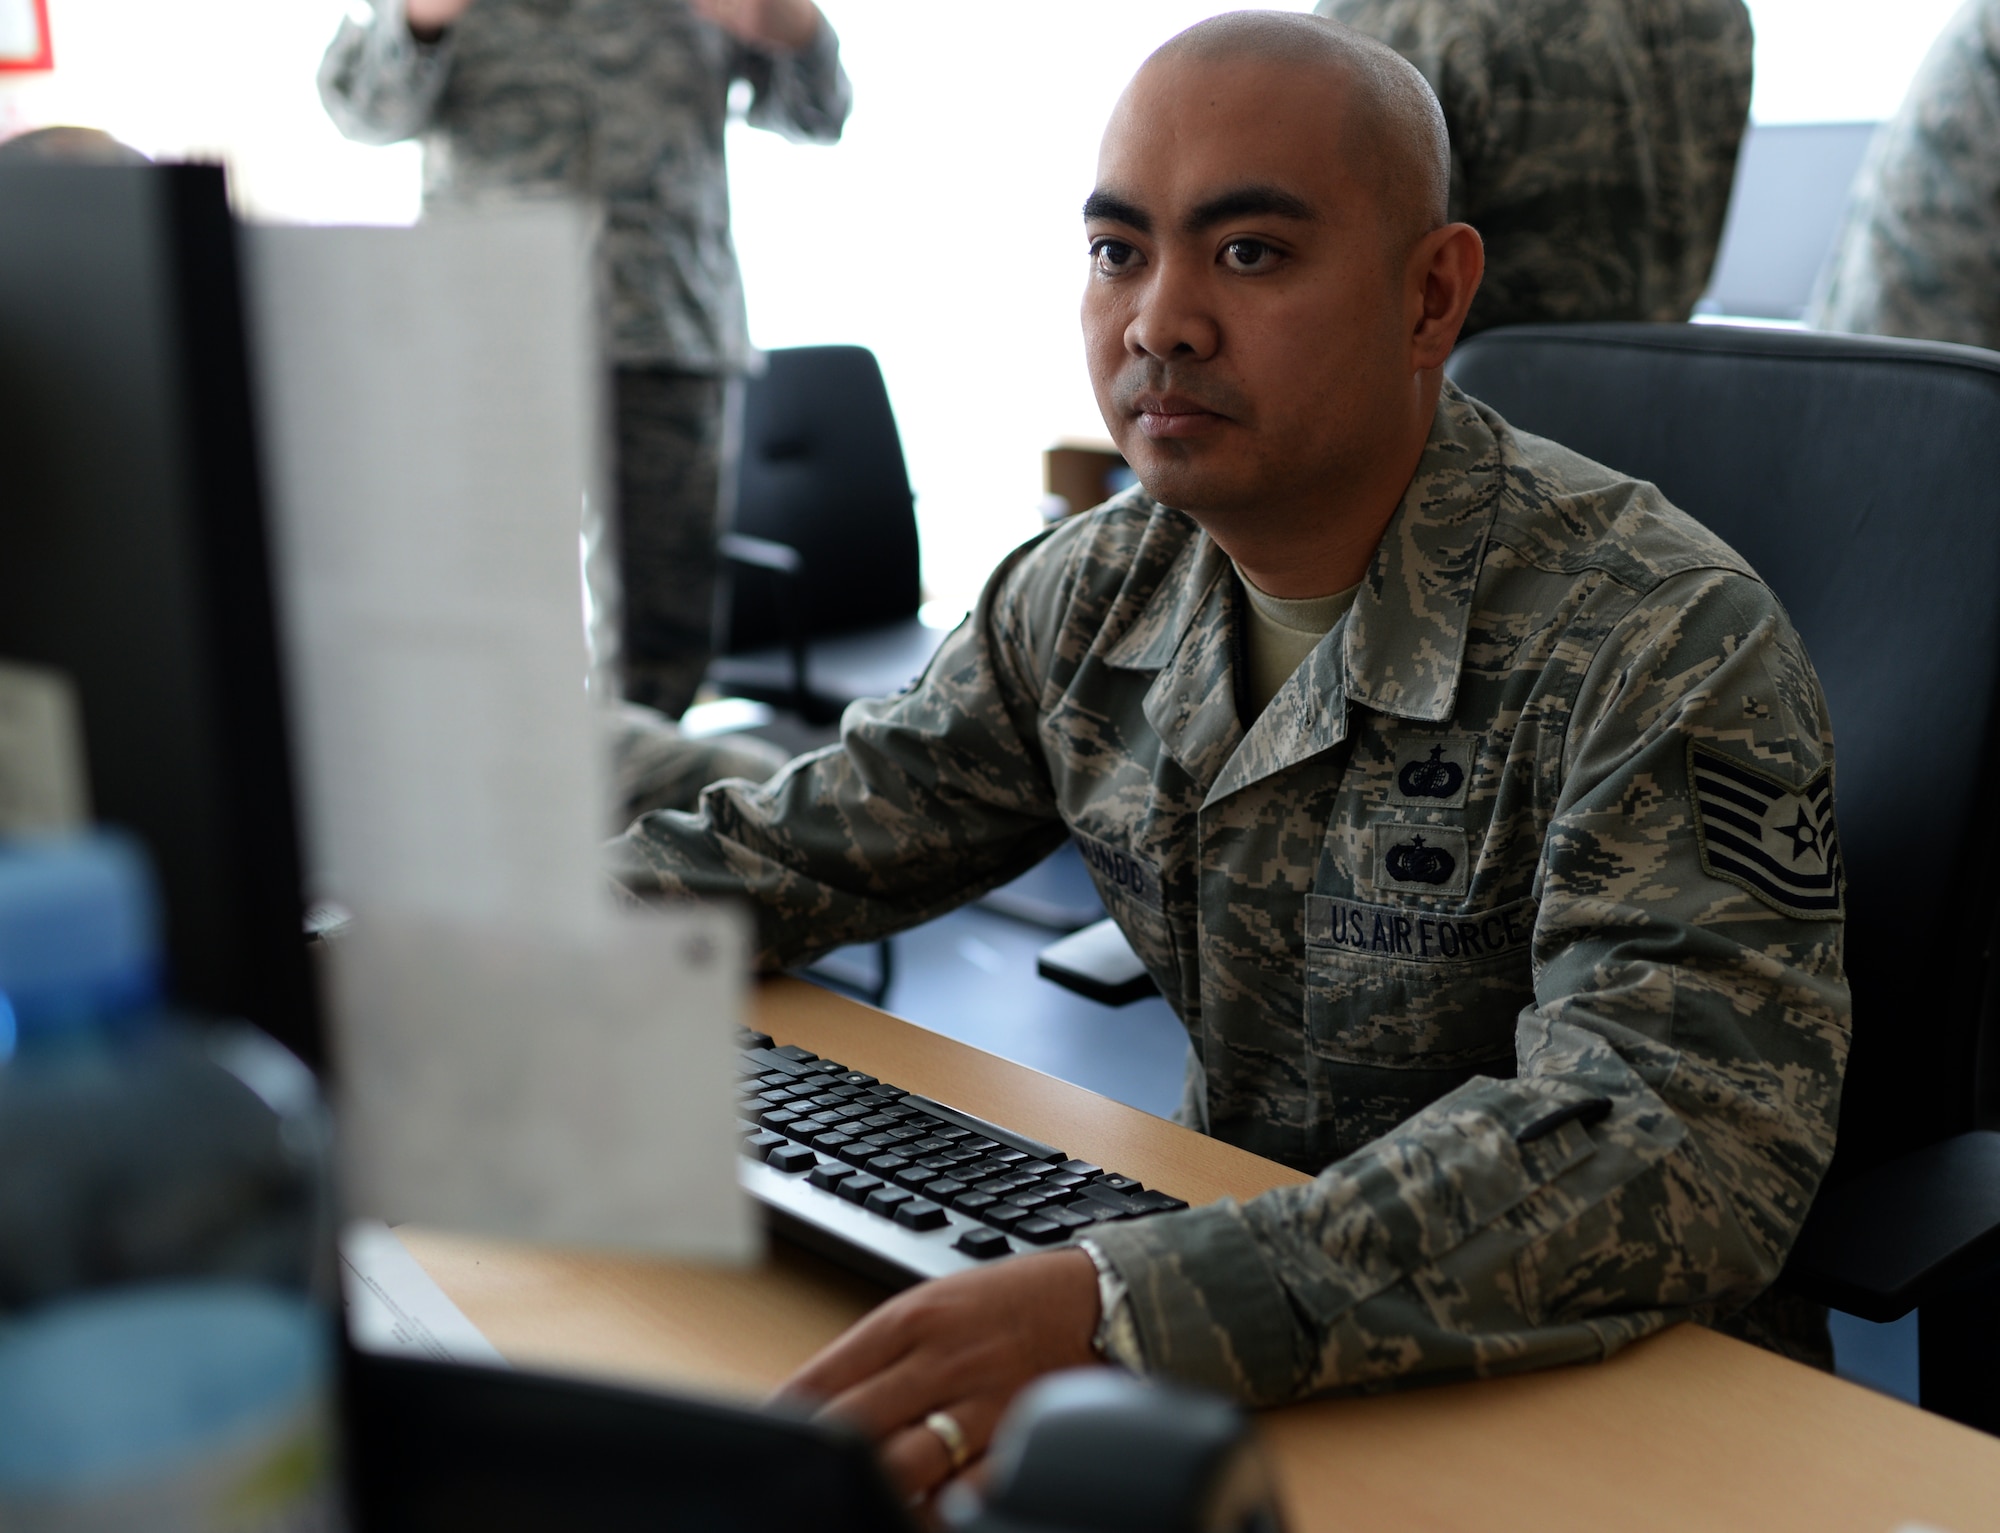 U.S. Air Force Tech. Sgt. Rommel Delmundo, Detachment 1, 52nd Operations Group contracting officer and Las Vegas native, reads an email while at his desk at Łask Air Base, Poland, May 7, 2014. The mission of Detachment 1 serves to foster bilateral defense ties, enhance regional security and increase interoperability among NATO allies through combined training exercises with periodic rotational aircraft. (U.S. Air Force photo by Staff Sgt. Joe W. McFadden/Released)